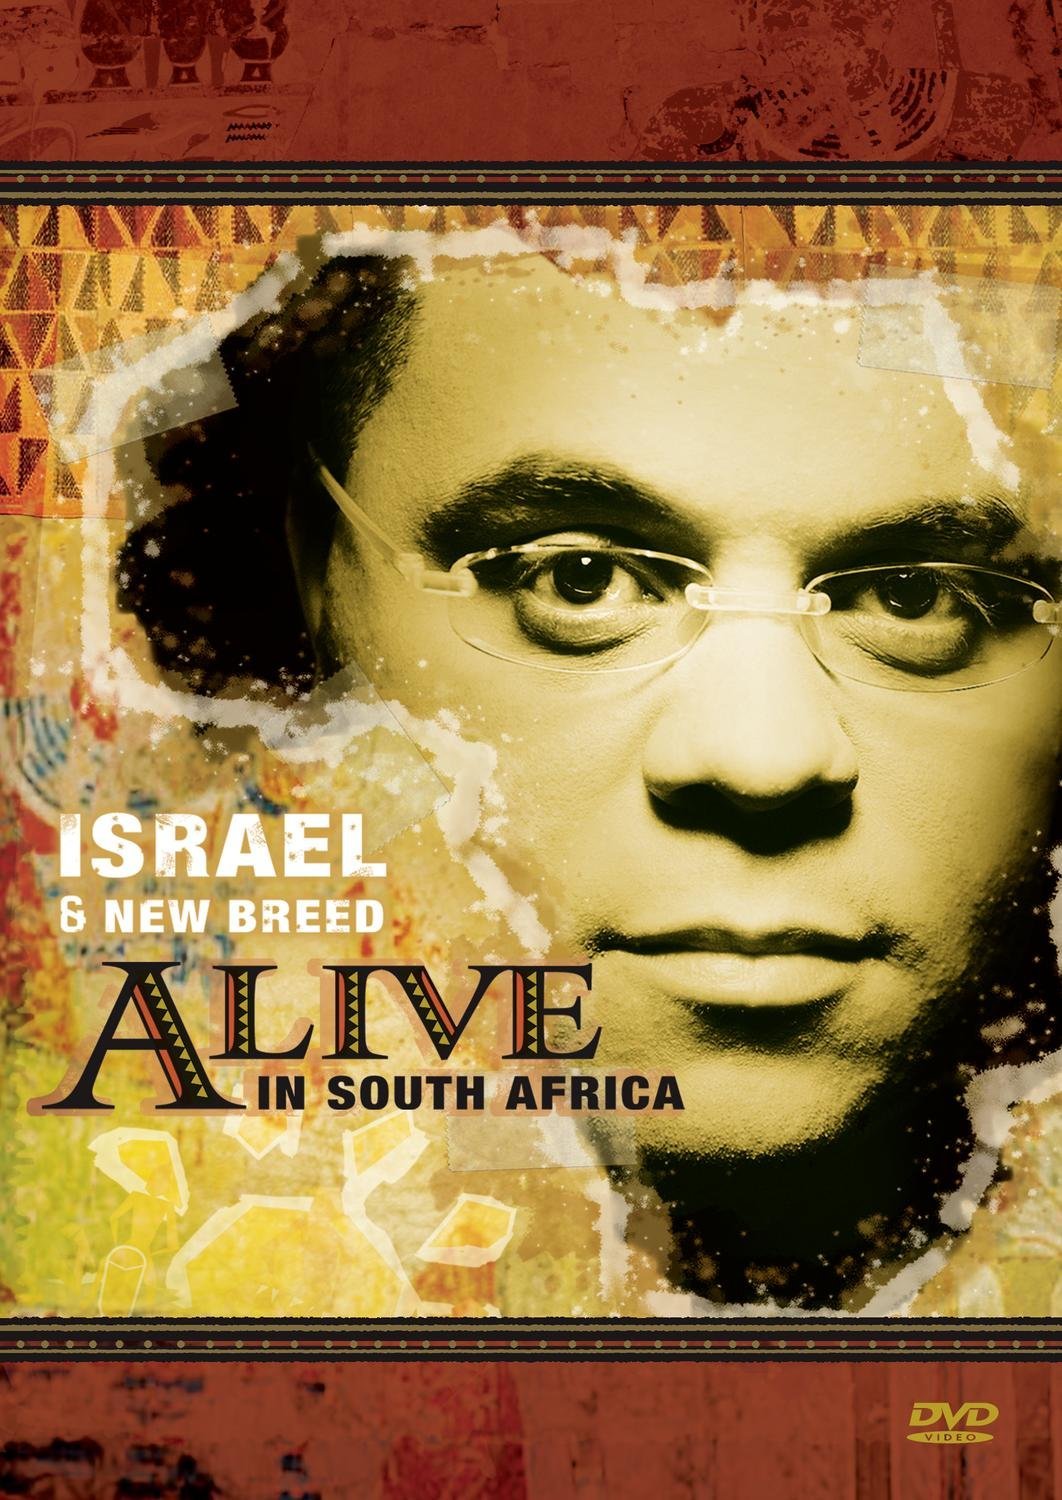 Israel & New Breed - Alive in South Africa (DVD)